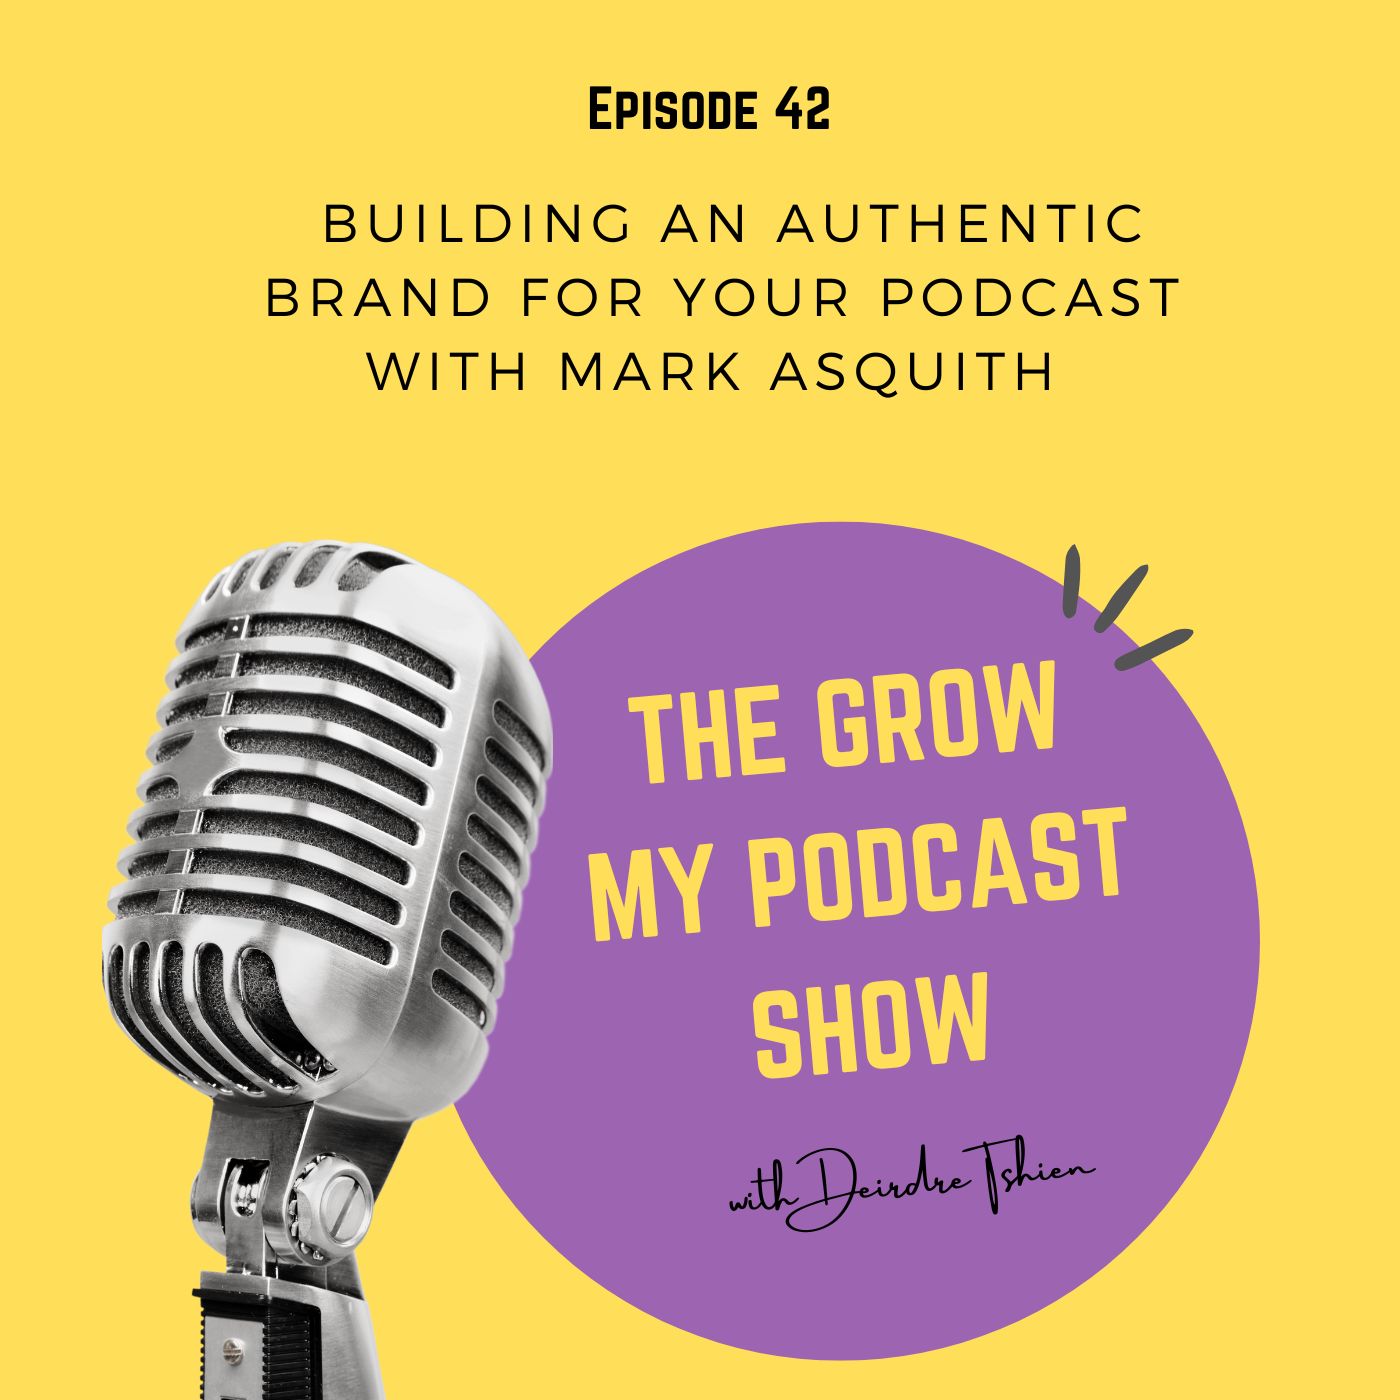 42. Building an Authentic Brand for your podcast with Mark Asquith Image